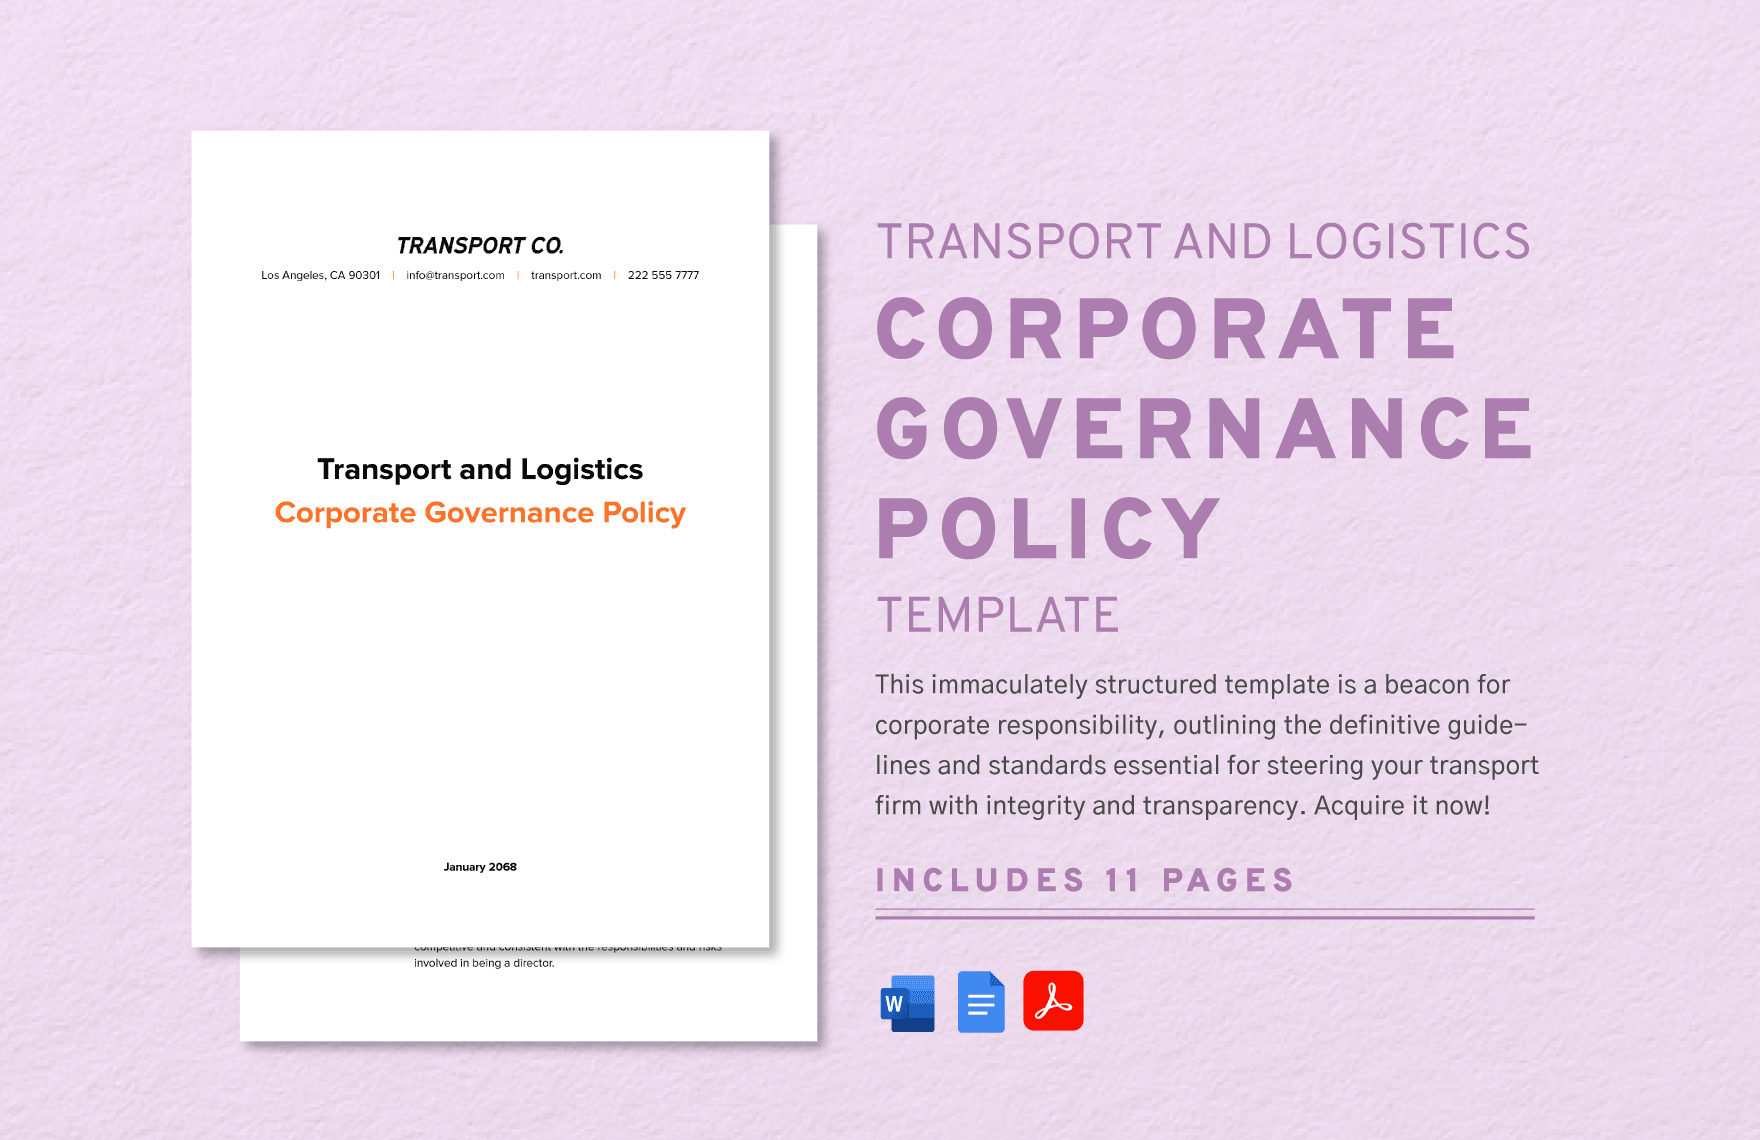 Transport and Logistics Corporate Governance Policy Template